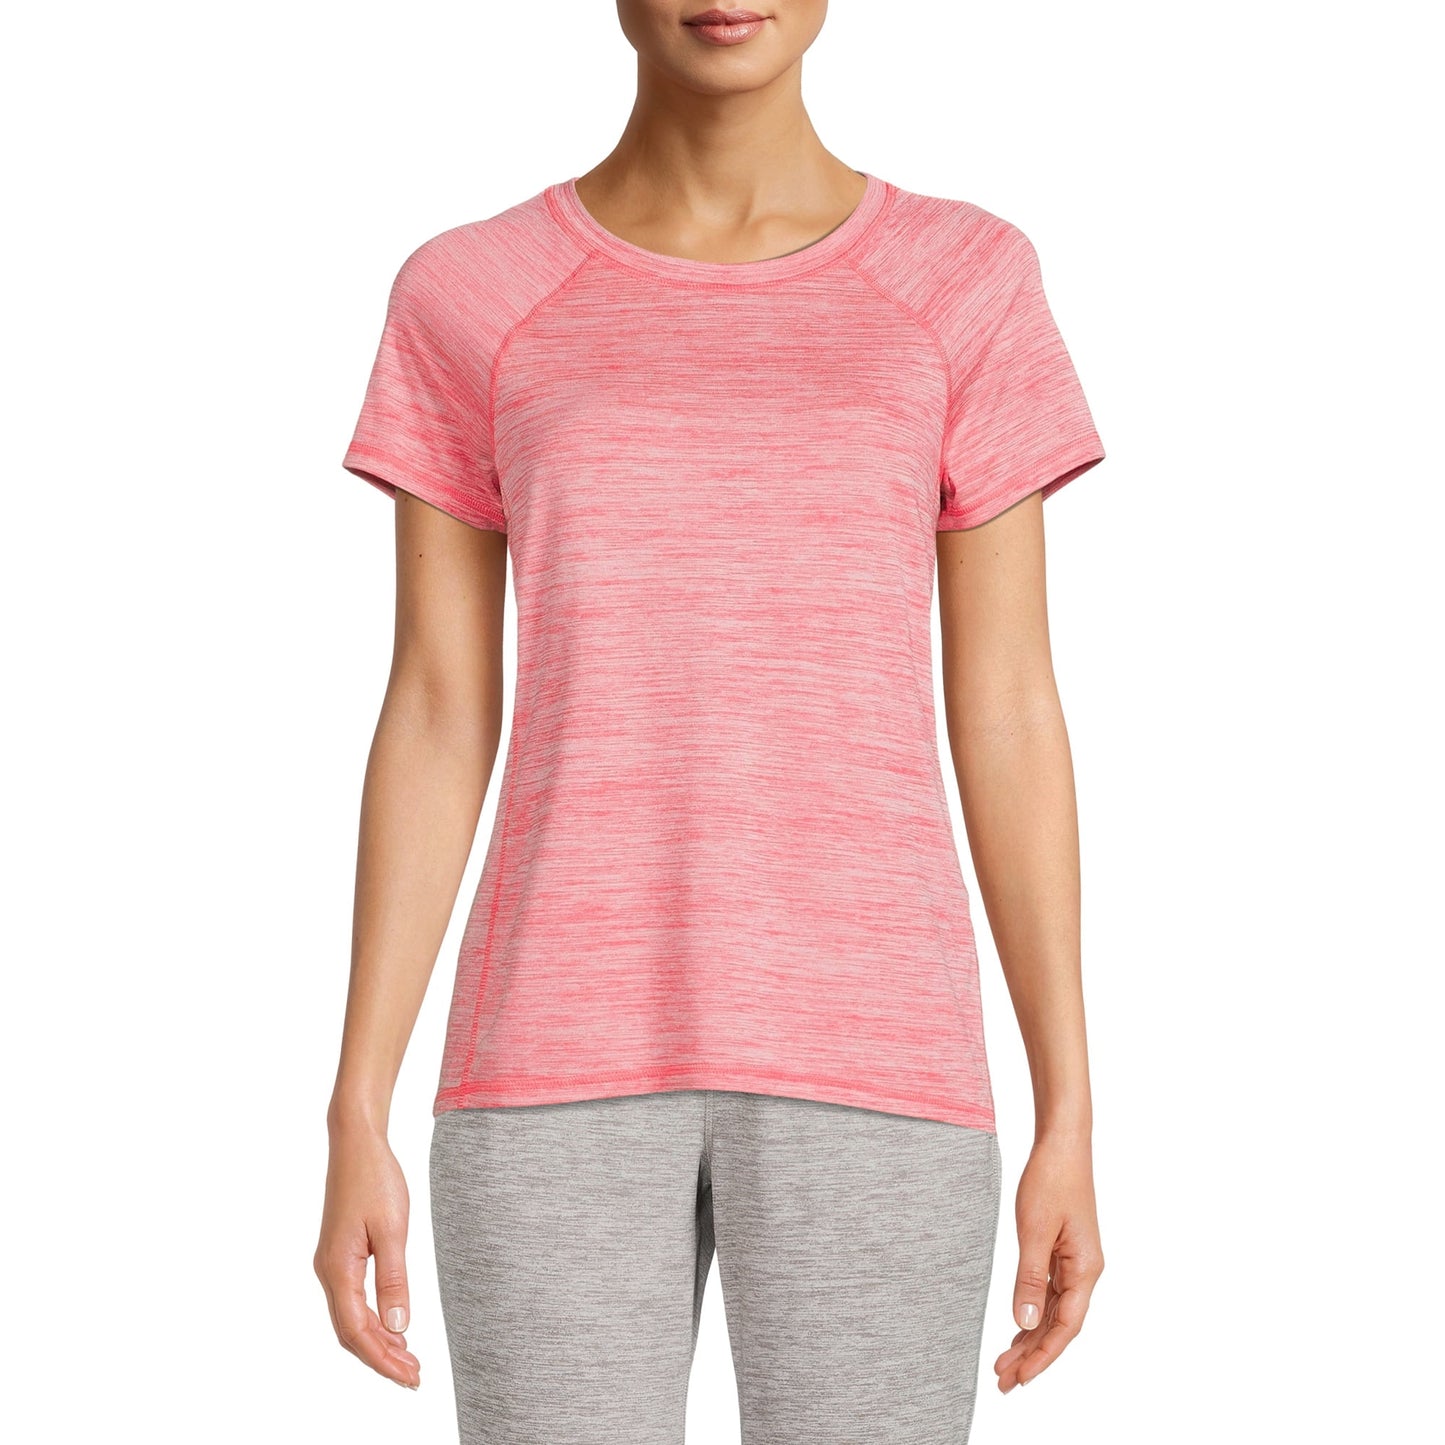 Athletic Works Active T-Shirt with Side Pocket